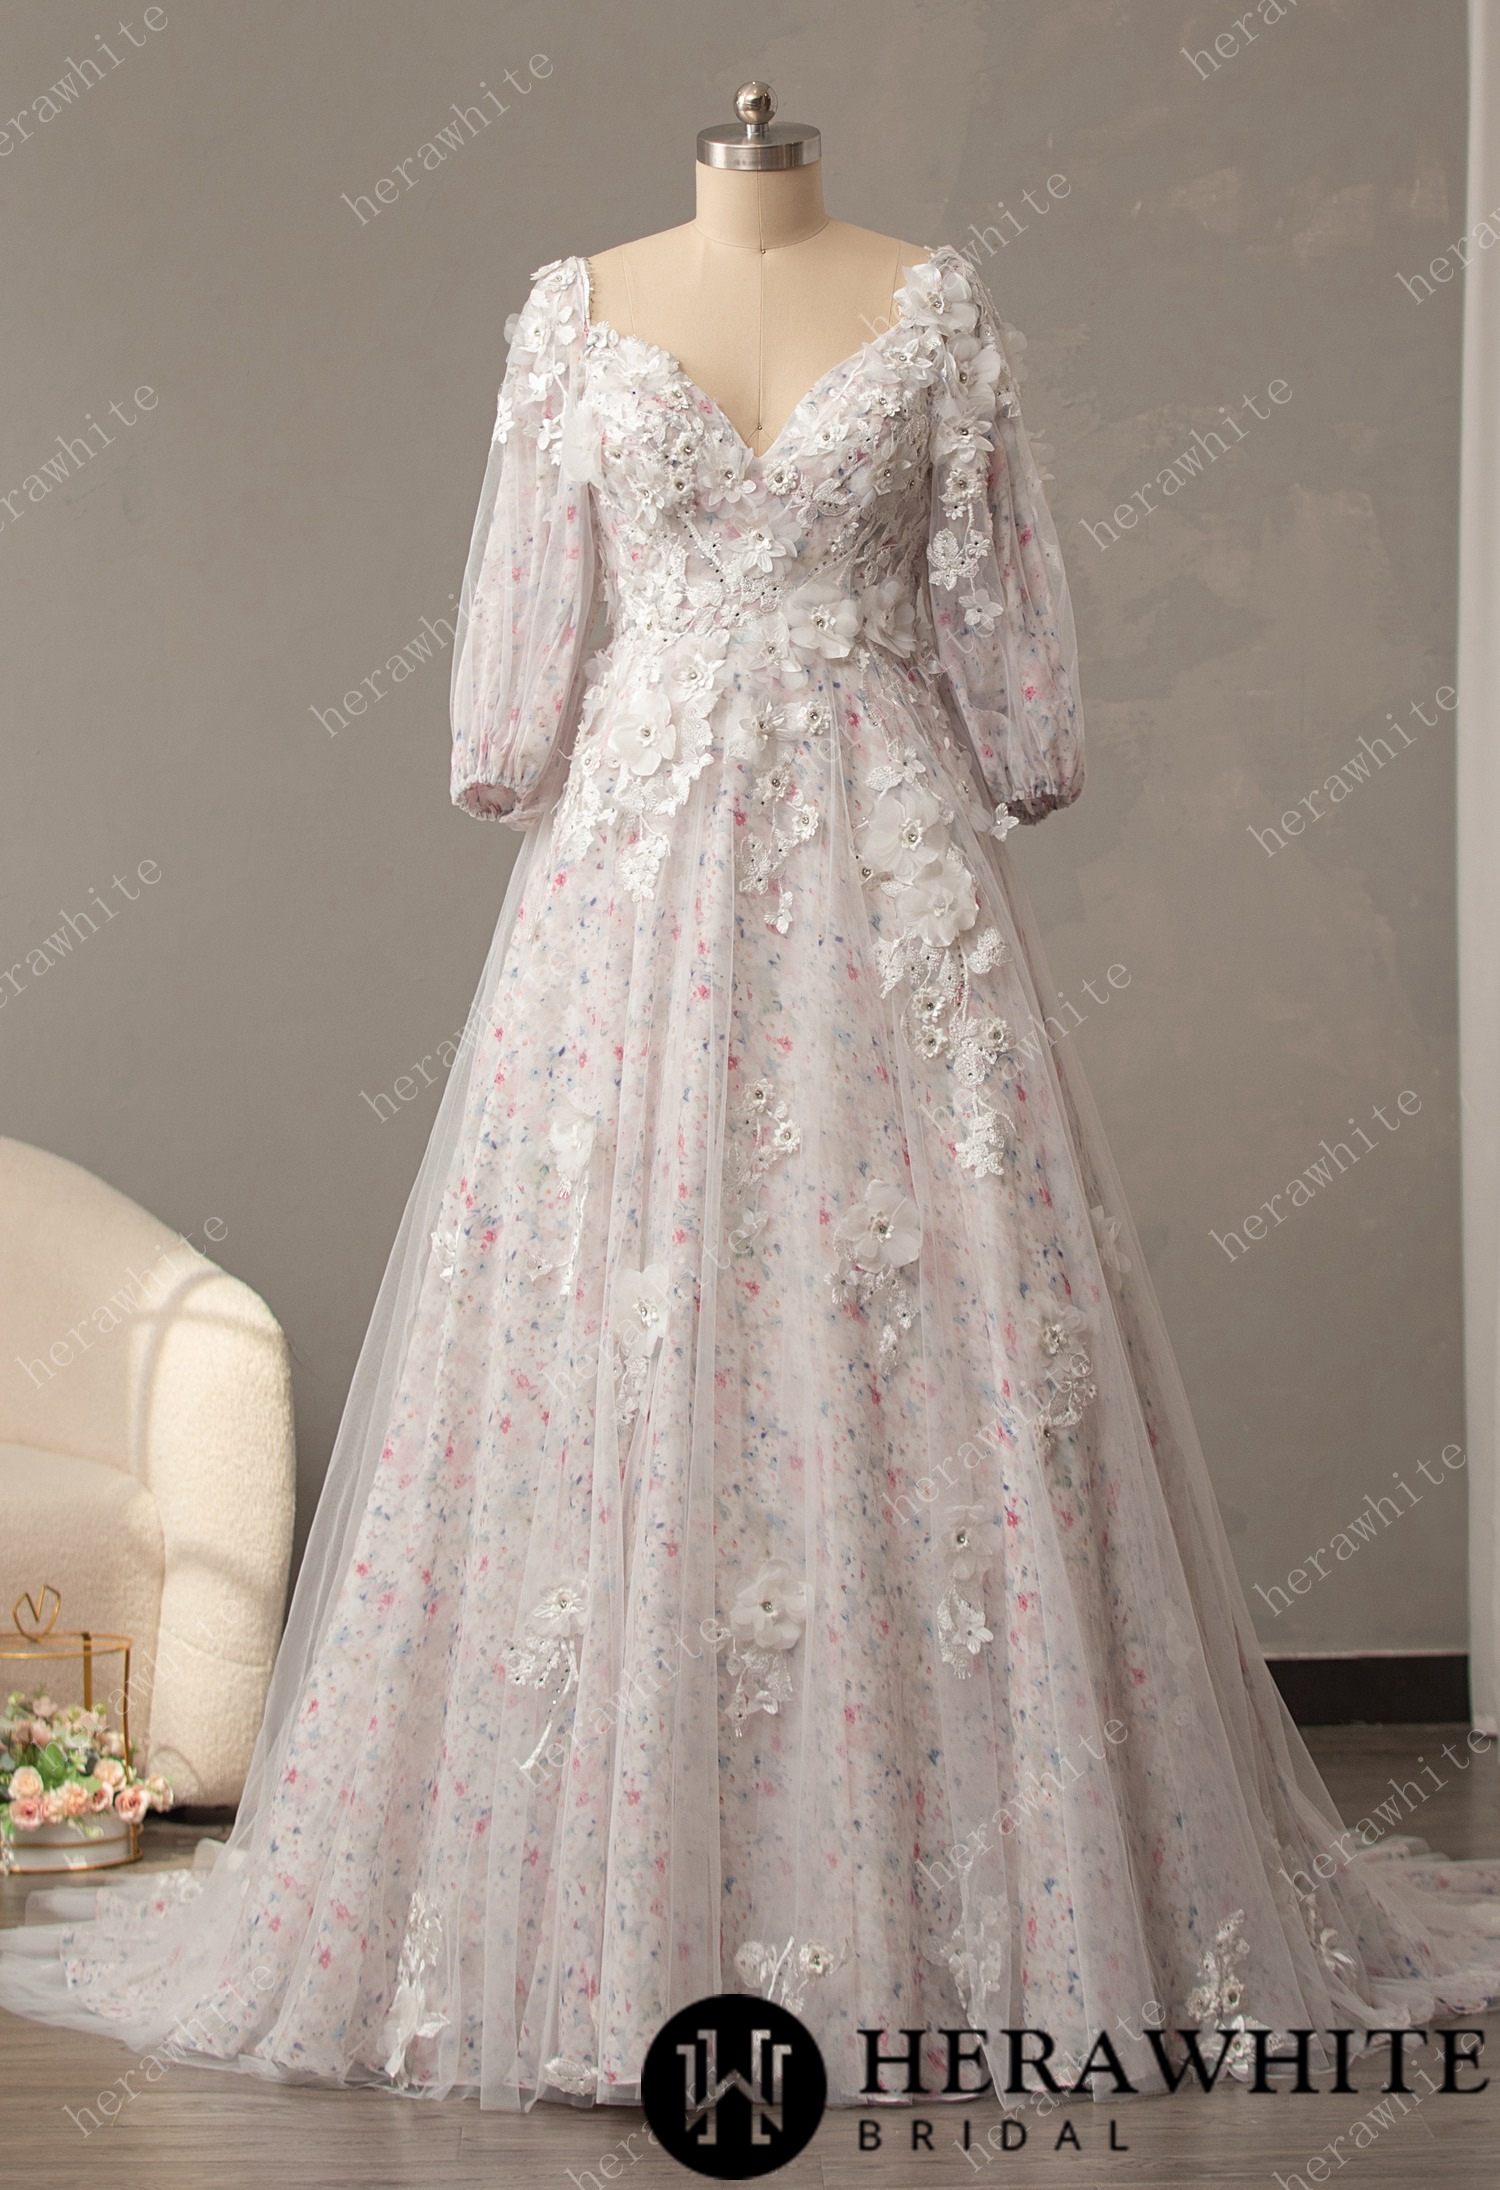 In Stock/ Floral 3D Lace A-Line Wedding Dress with Detachable Sleeve